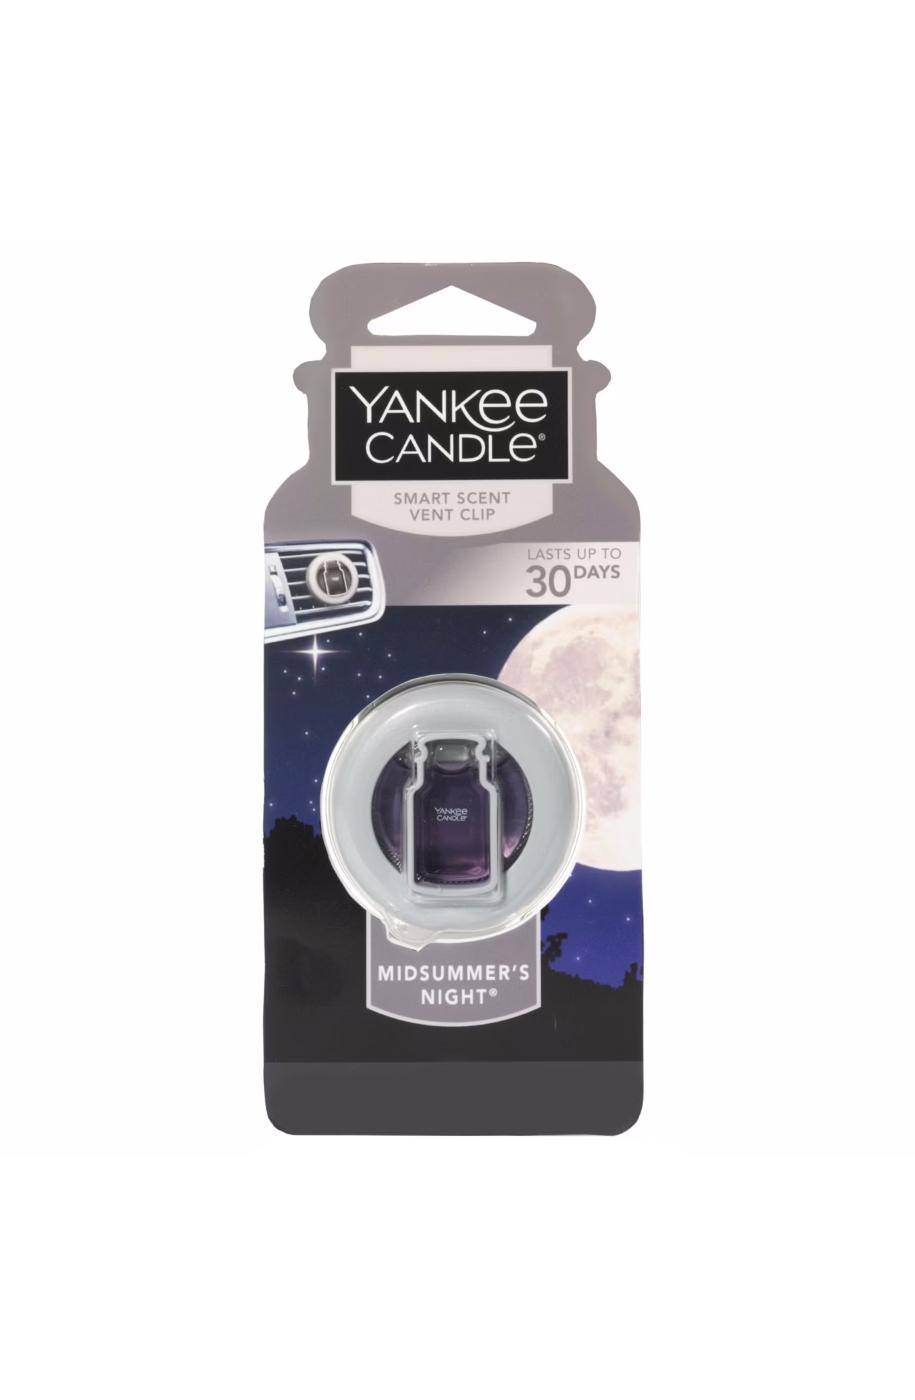 Yankee Candle Smart Scent Vent Clip - Midsummer's Night; image 1 of 2